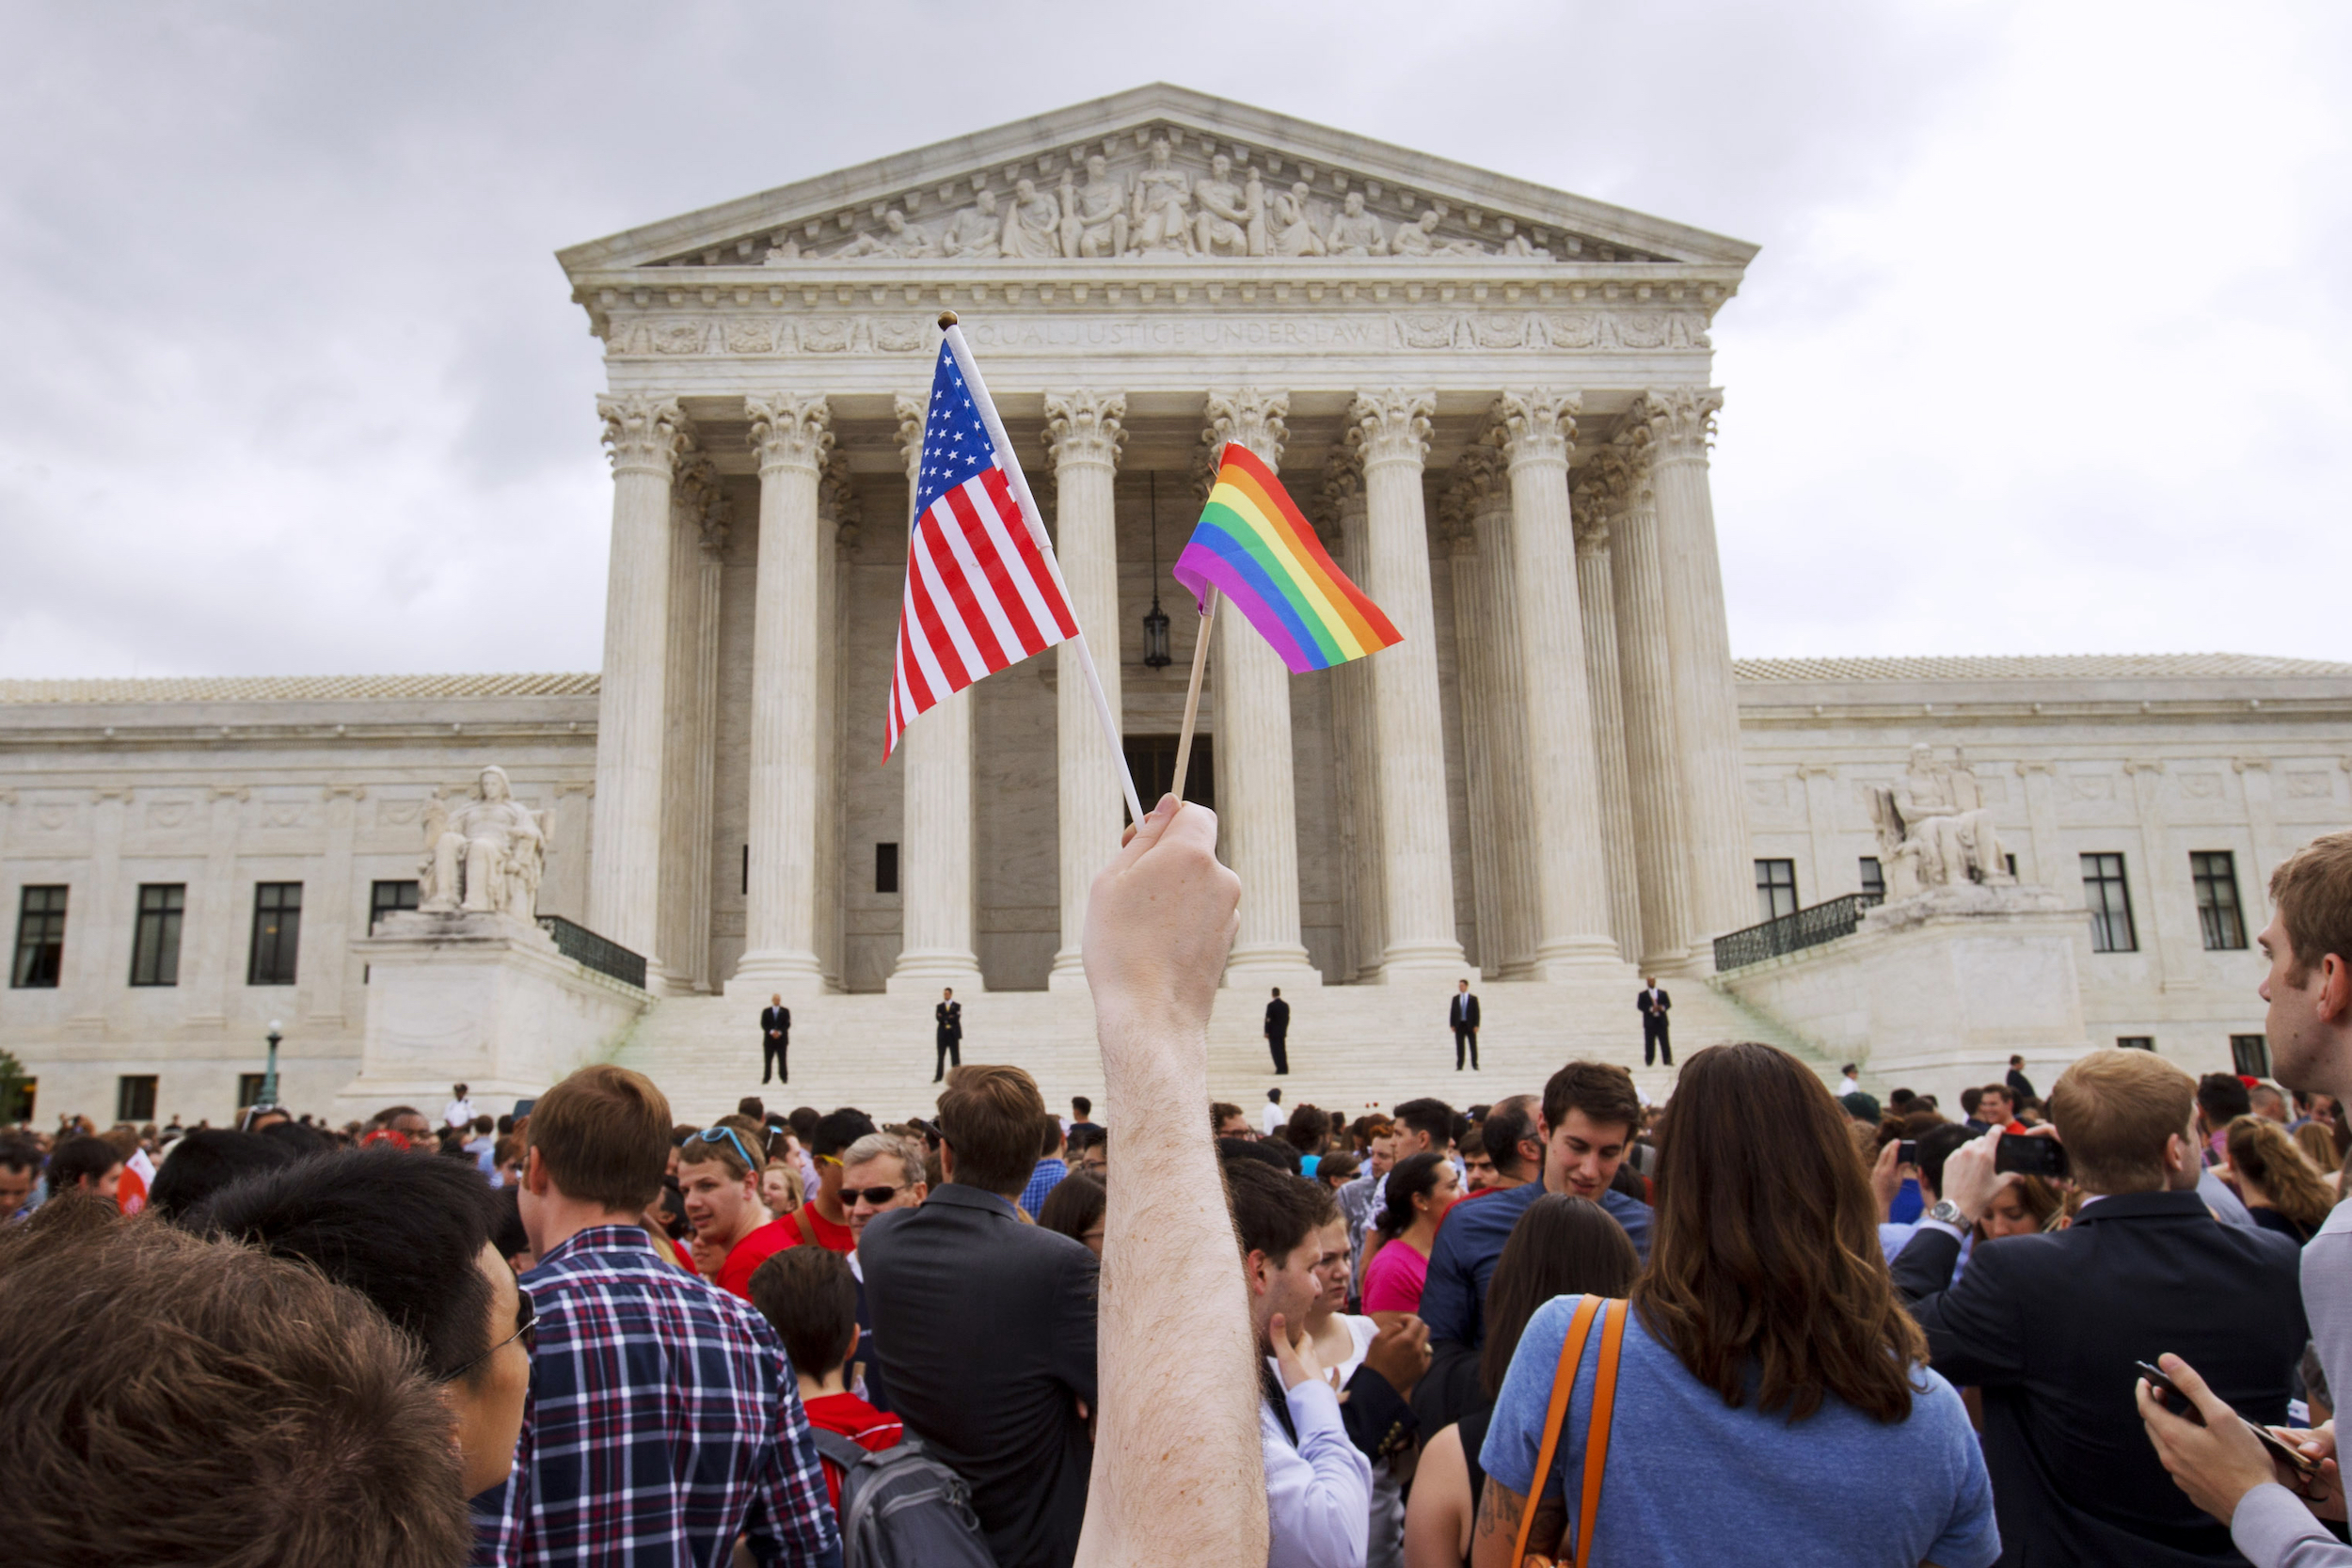 Same-sex marriage would be illegal in 25 to 32 states if the Supreme Court overturned Obergefell